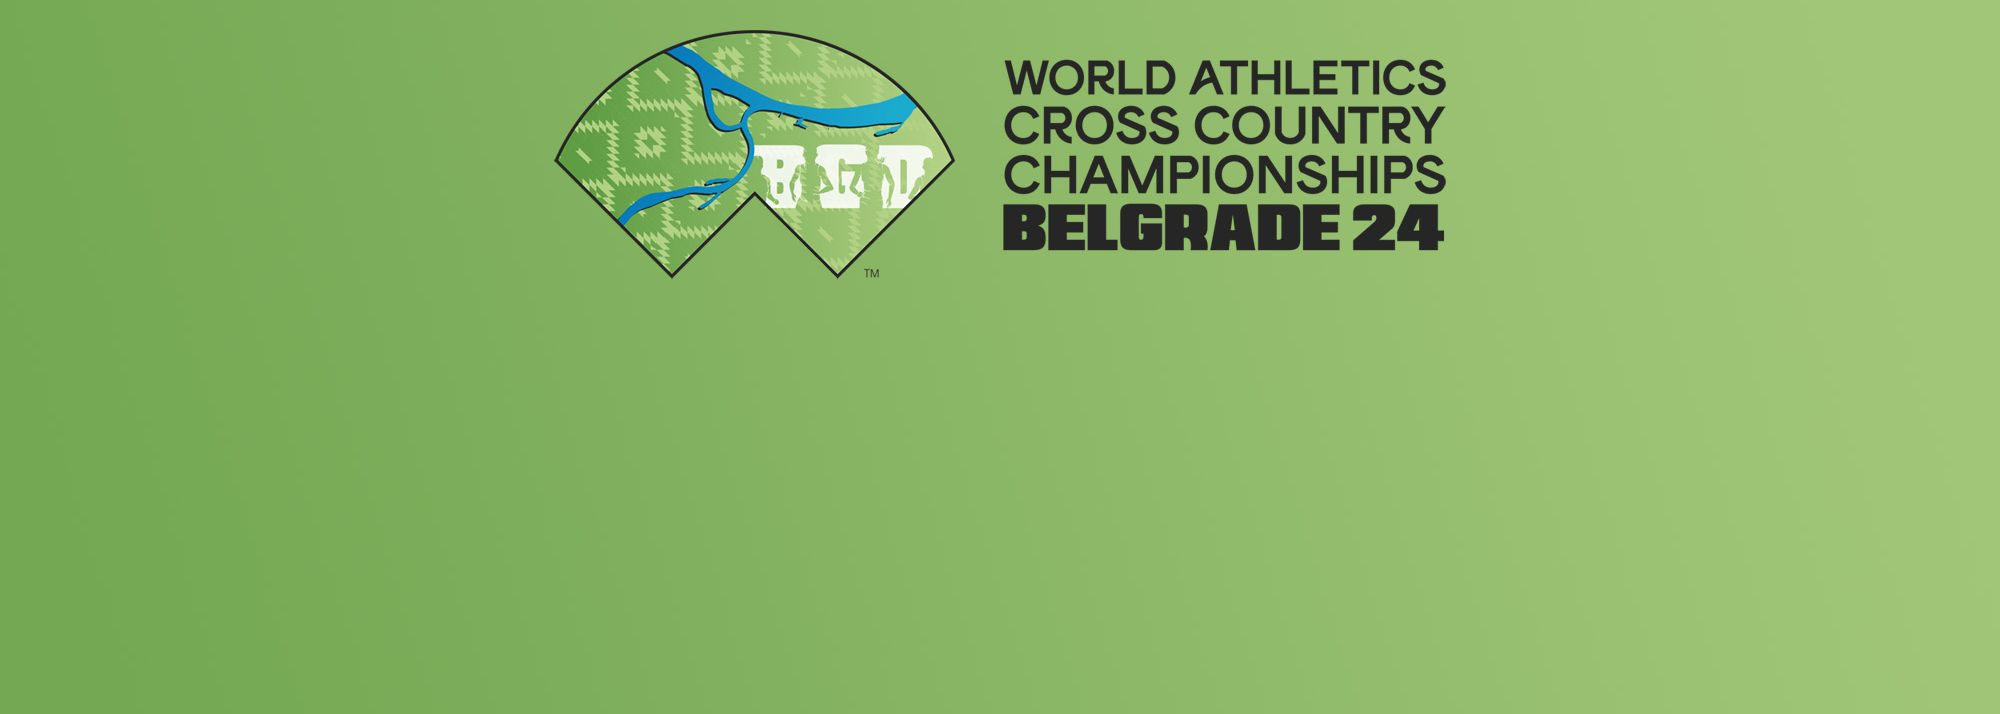 To mark 100 days to go until the World Athletics Cross Country Championships Belgrade 24, the event logo was unveiled